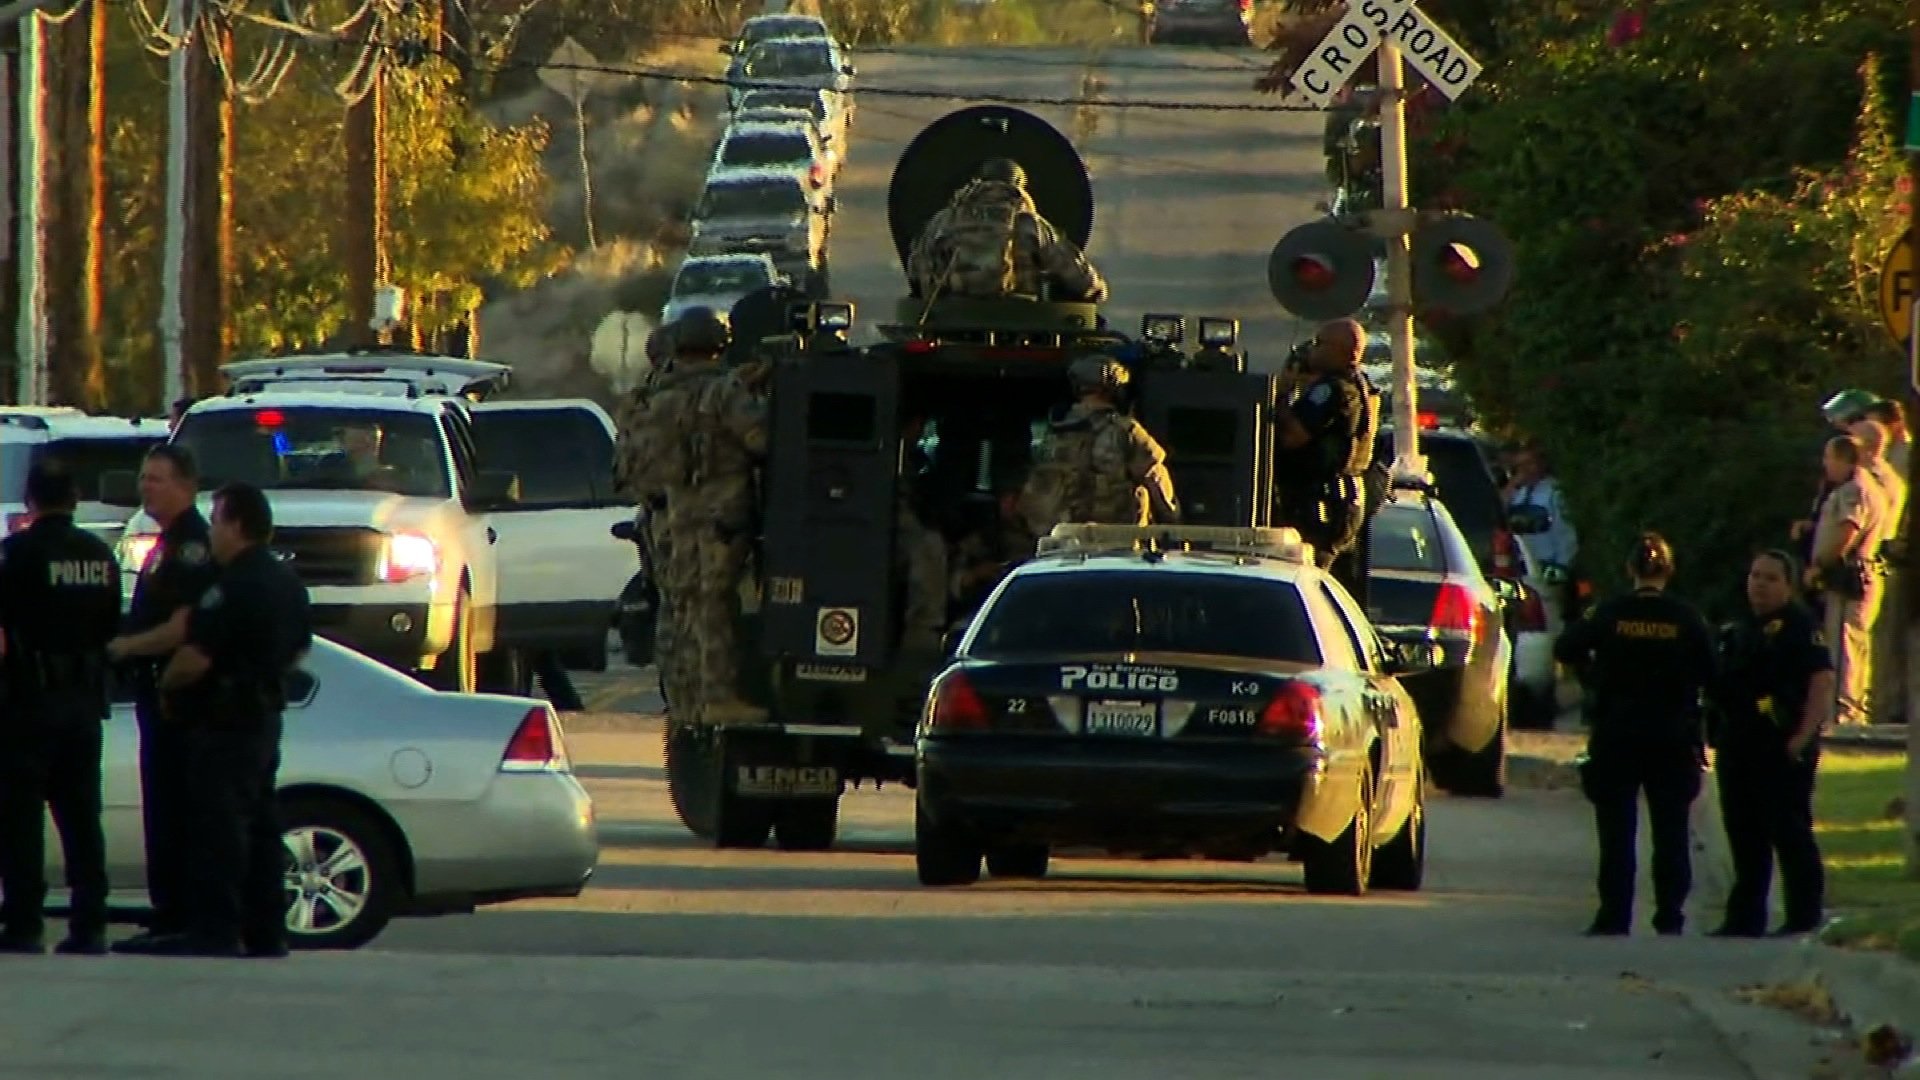 The hunt for one to three suspects is taking place near a San Bernardino, California, center for people with developmental disabilities, where at least 14 people were killed Wednesday, Police Chief Jarrod Burguan told reporters.